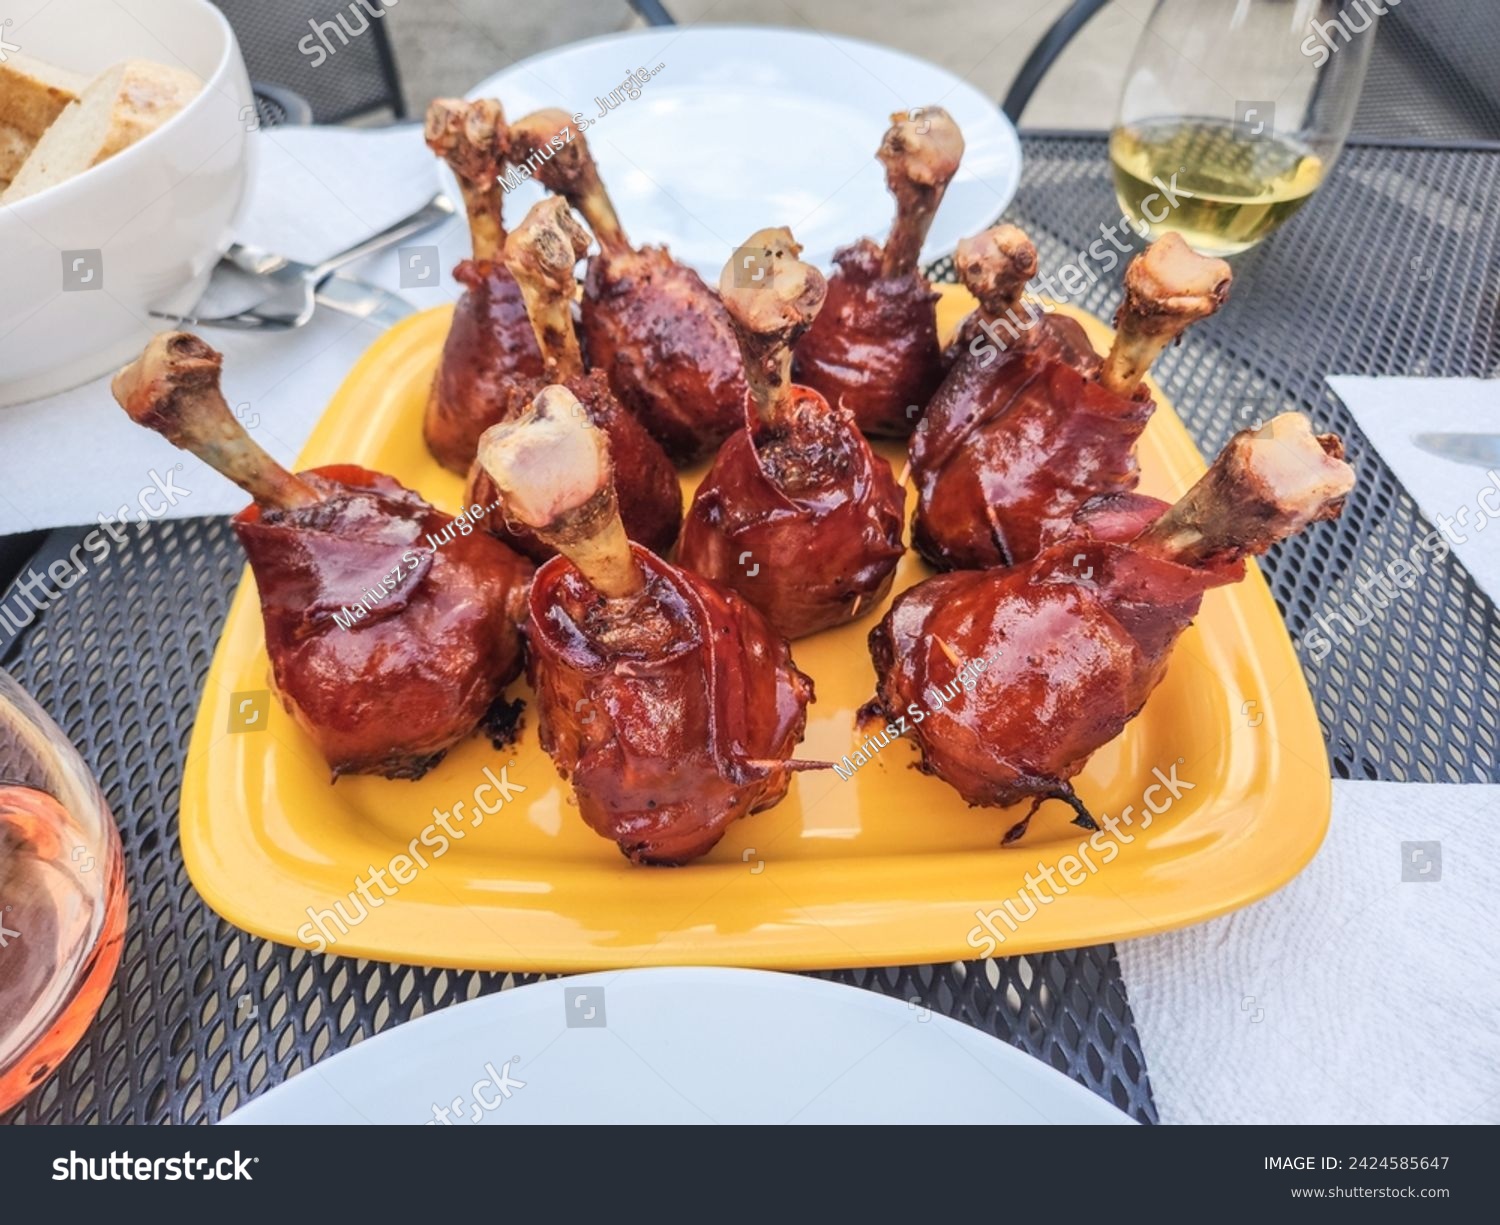 Chicken lollipop is a popular Indian fried chicken appetiser. Chicken lollipop is chicken winglet, wherein the meat is cut loose from the bone end and pushed down, creating a lollipop appearance. #2424585647